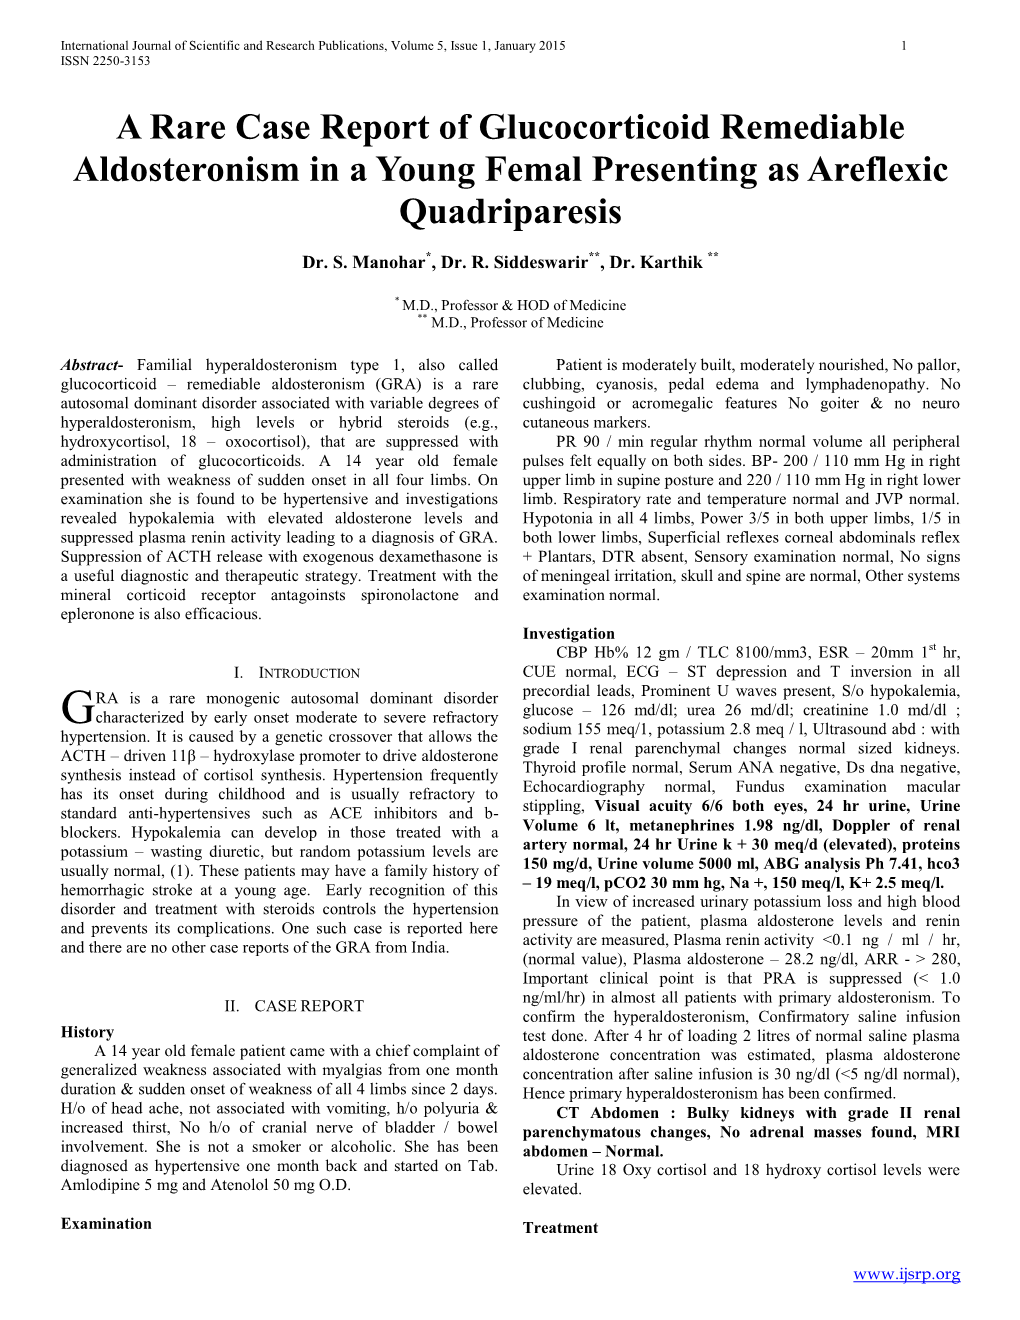 A Rare Case Report of Glucocorticoid Remediable Aldosteronism in a Young Femal Presenting As Areflexic Quadriparesis